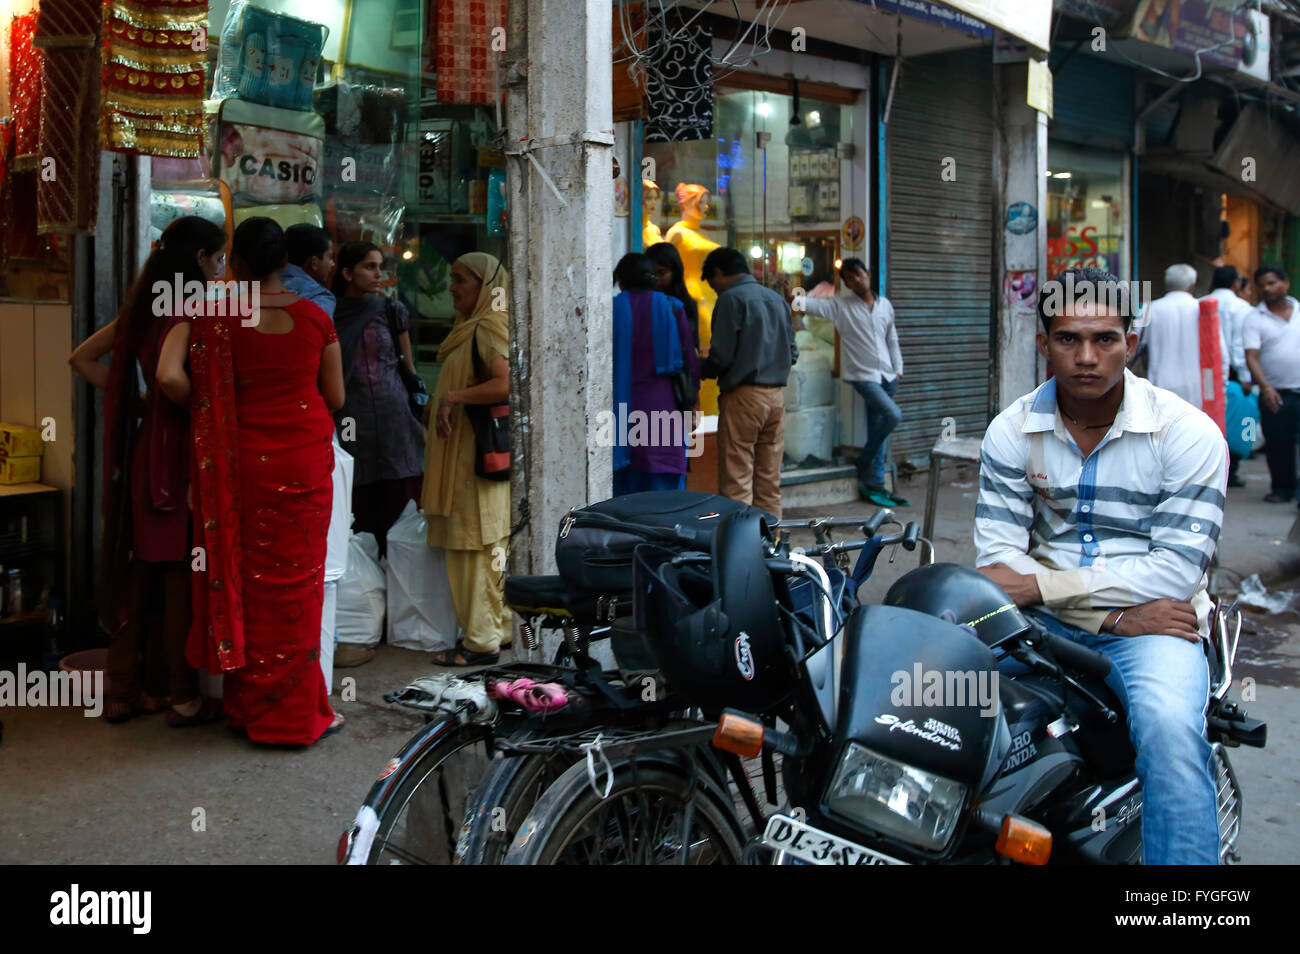 Young man on motorcycle, Old Delhi, India Stock Photo - Alamy